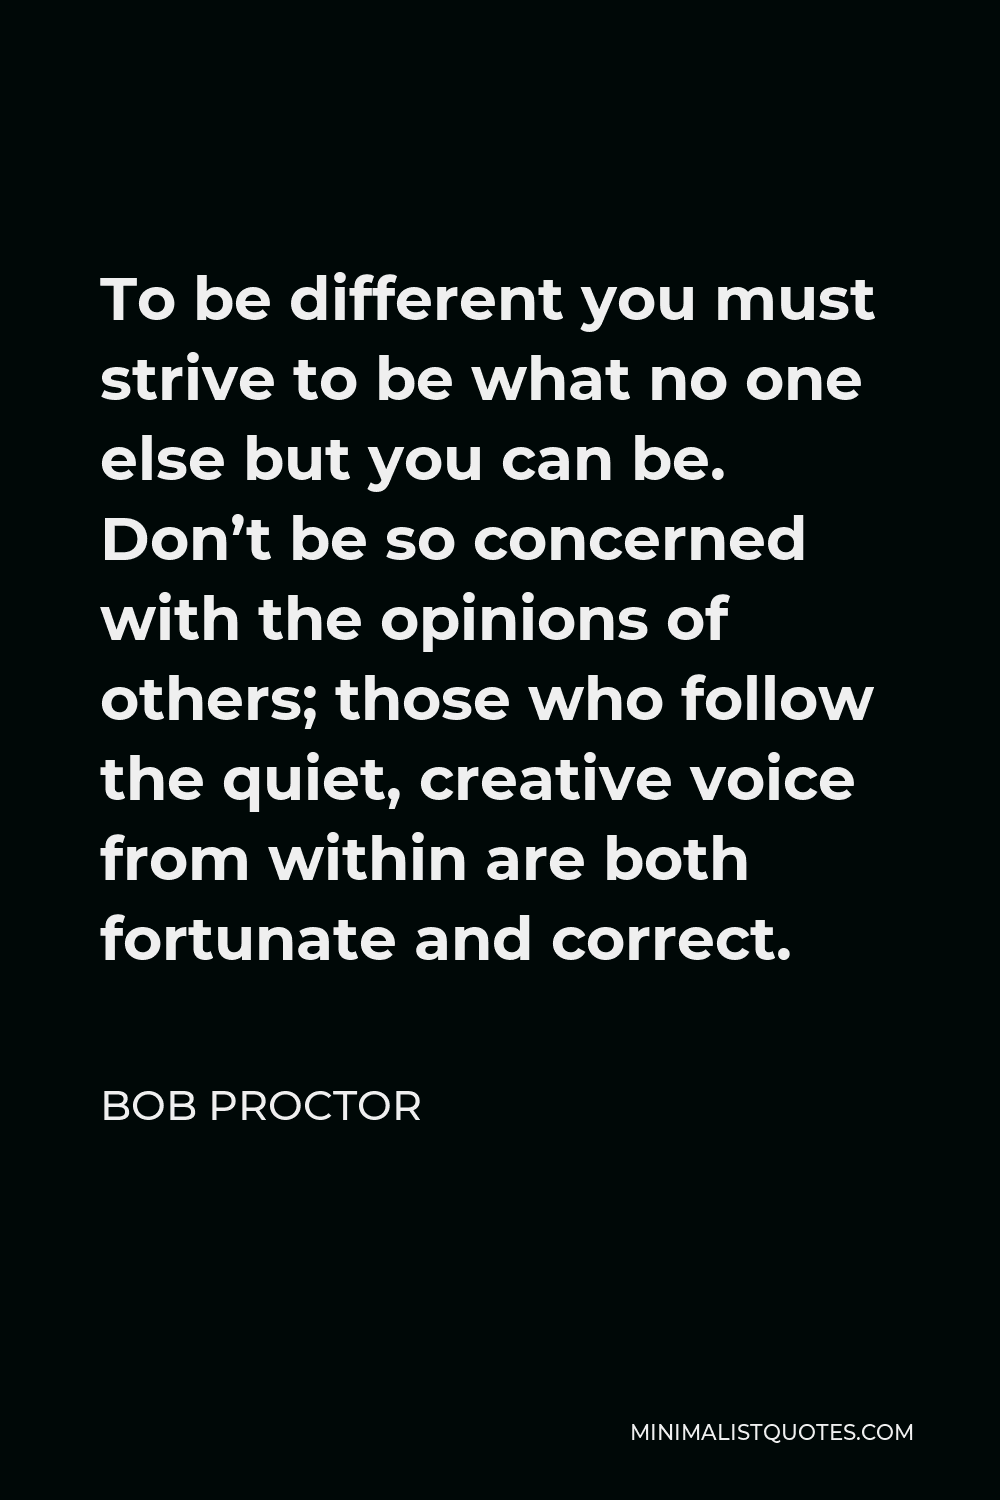 Bob Proctor Quote - To be different you must strive to be what no one else but you can be. Don’t be so concerned with the opinions of others; those who follow the quiet, creative voice from within are both fortunate and correct.